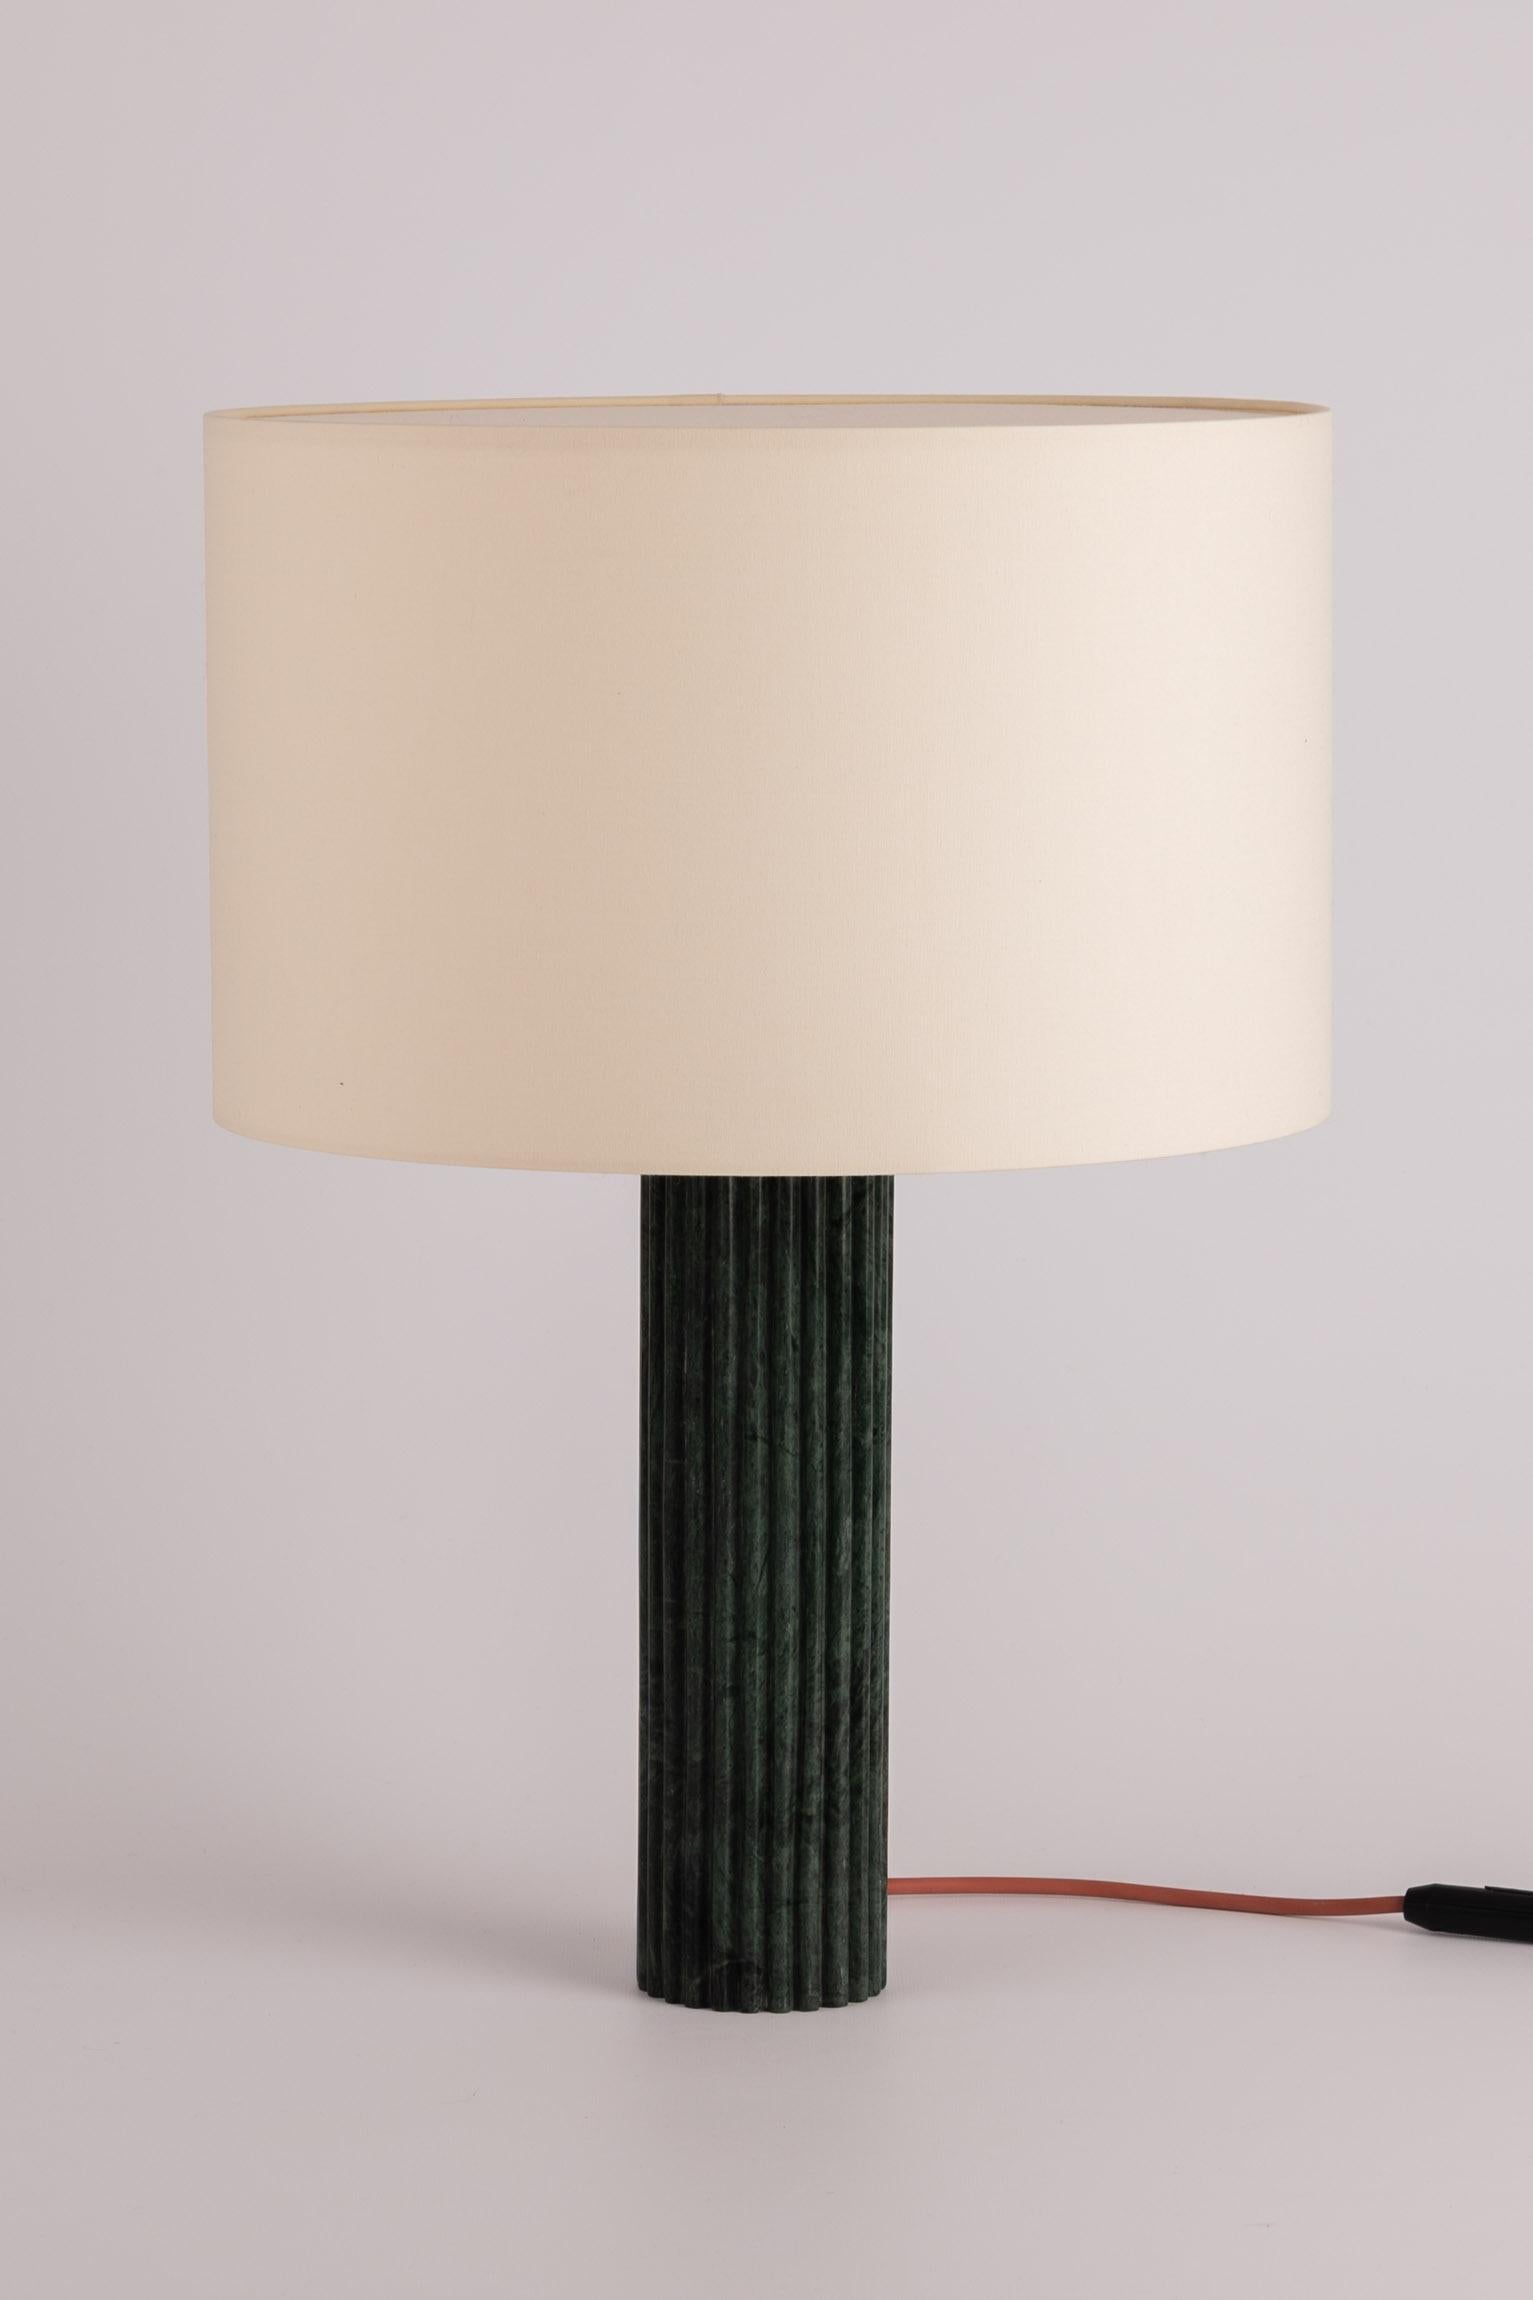 Black Marble Fluta Table Lamp by Simone & Marcel
Dimensions: Ø 40 x H 58 cm.
Materials: Cotton and black marble.

Also available in different marble and wood options and finishes. Custom options available on request. Please contact us. 

All our